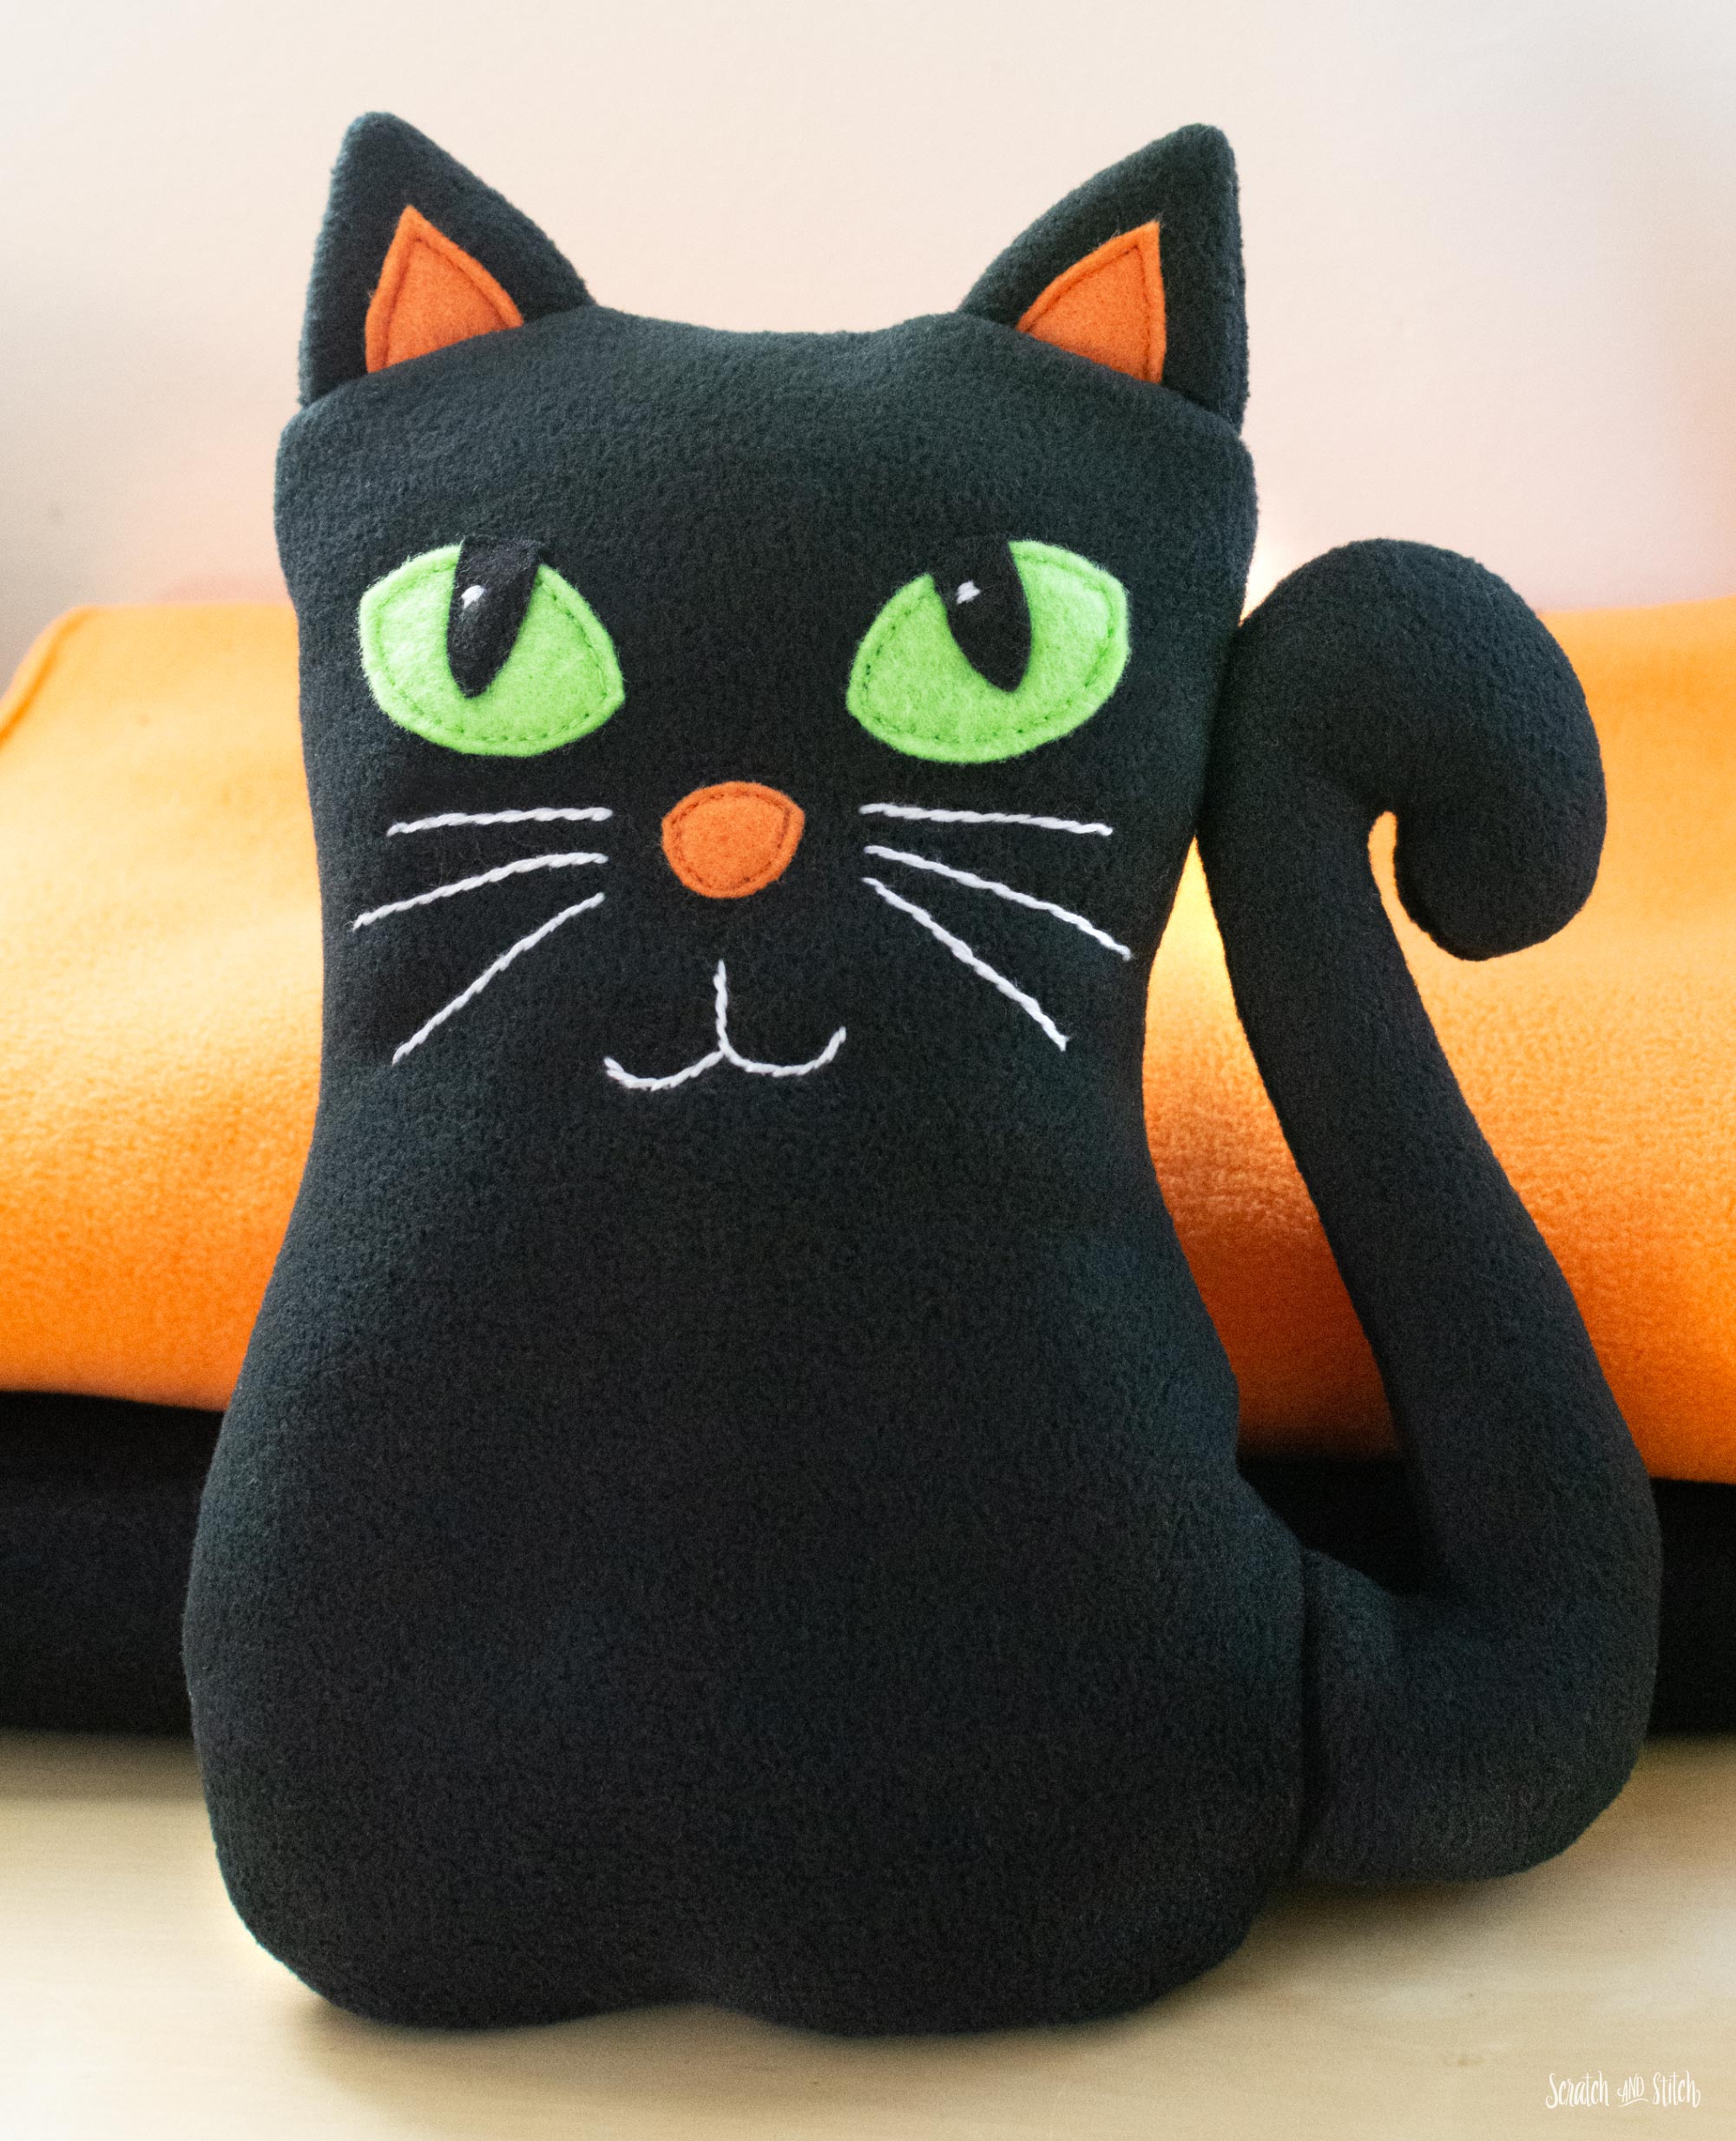 From cute and cuddly to realistic: the best Stuffed Cat sewing